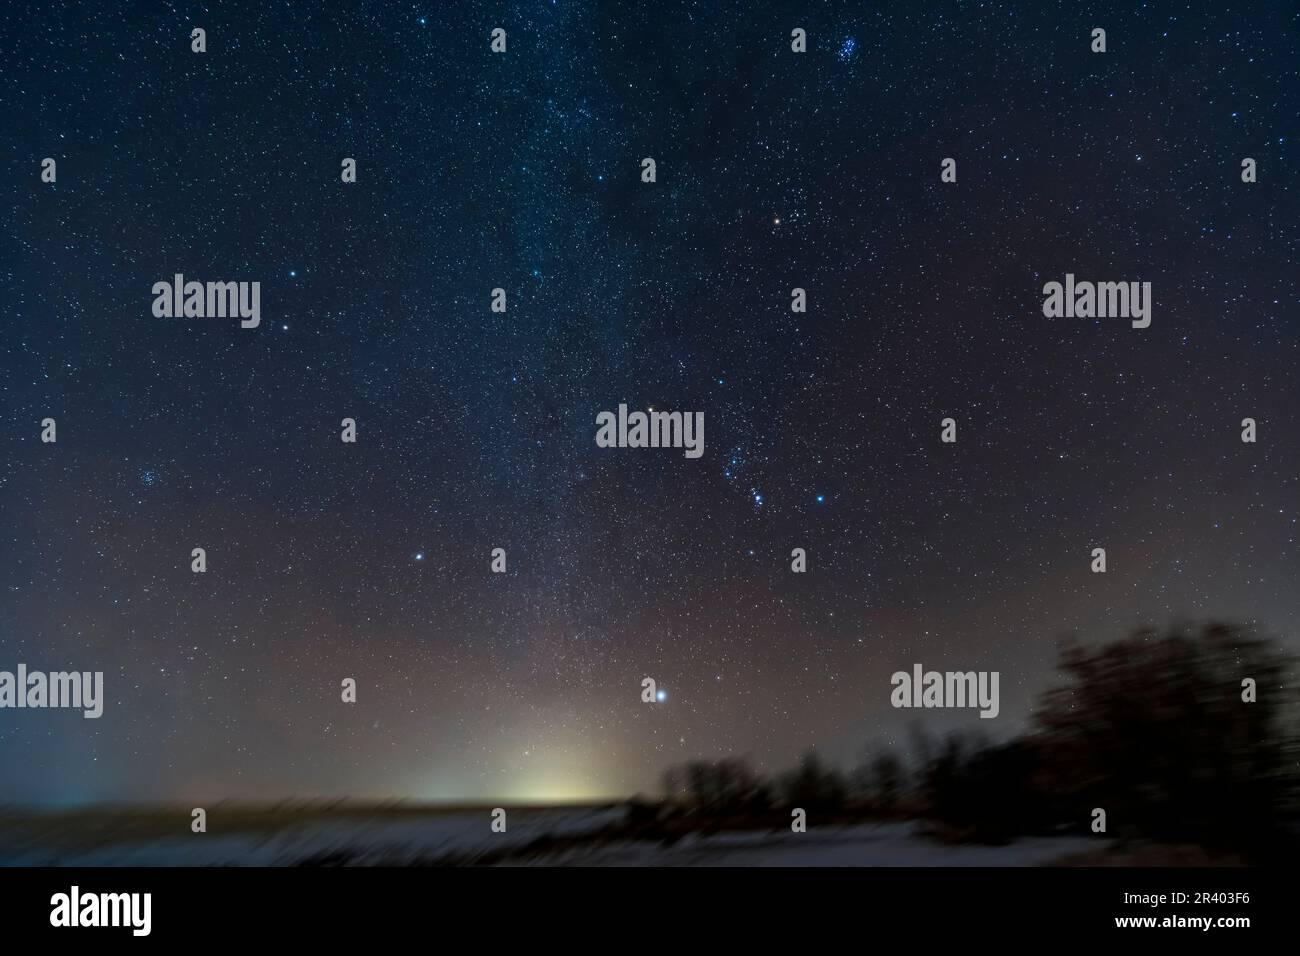 The winter sky rising in the southeast, Alberta, Canada, with bright star clusters along the Milky Way. Stock Photo